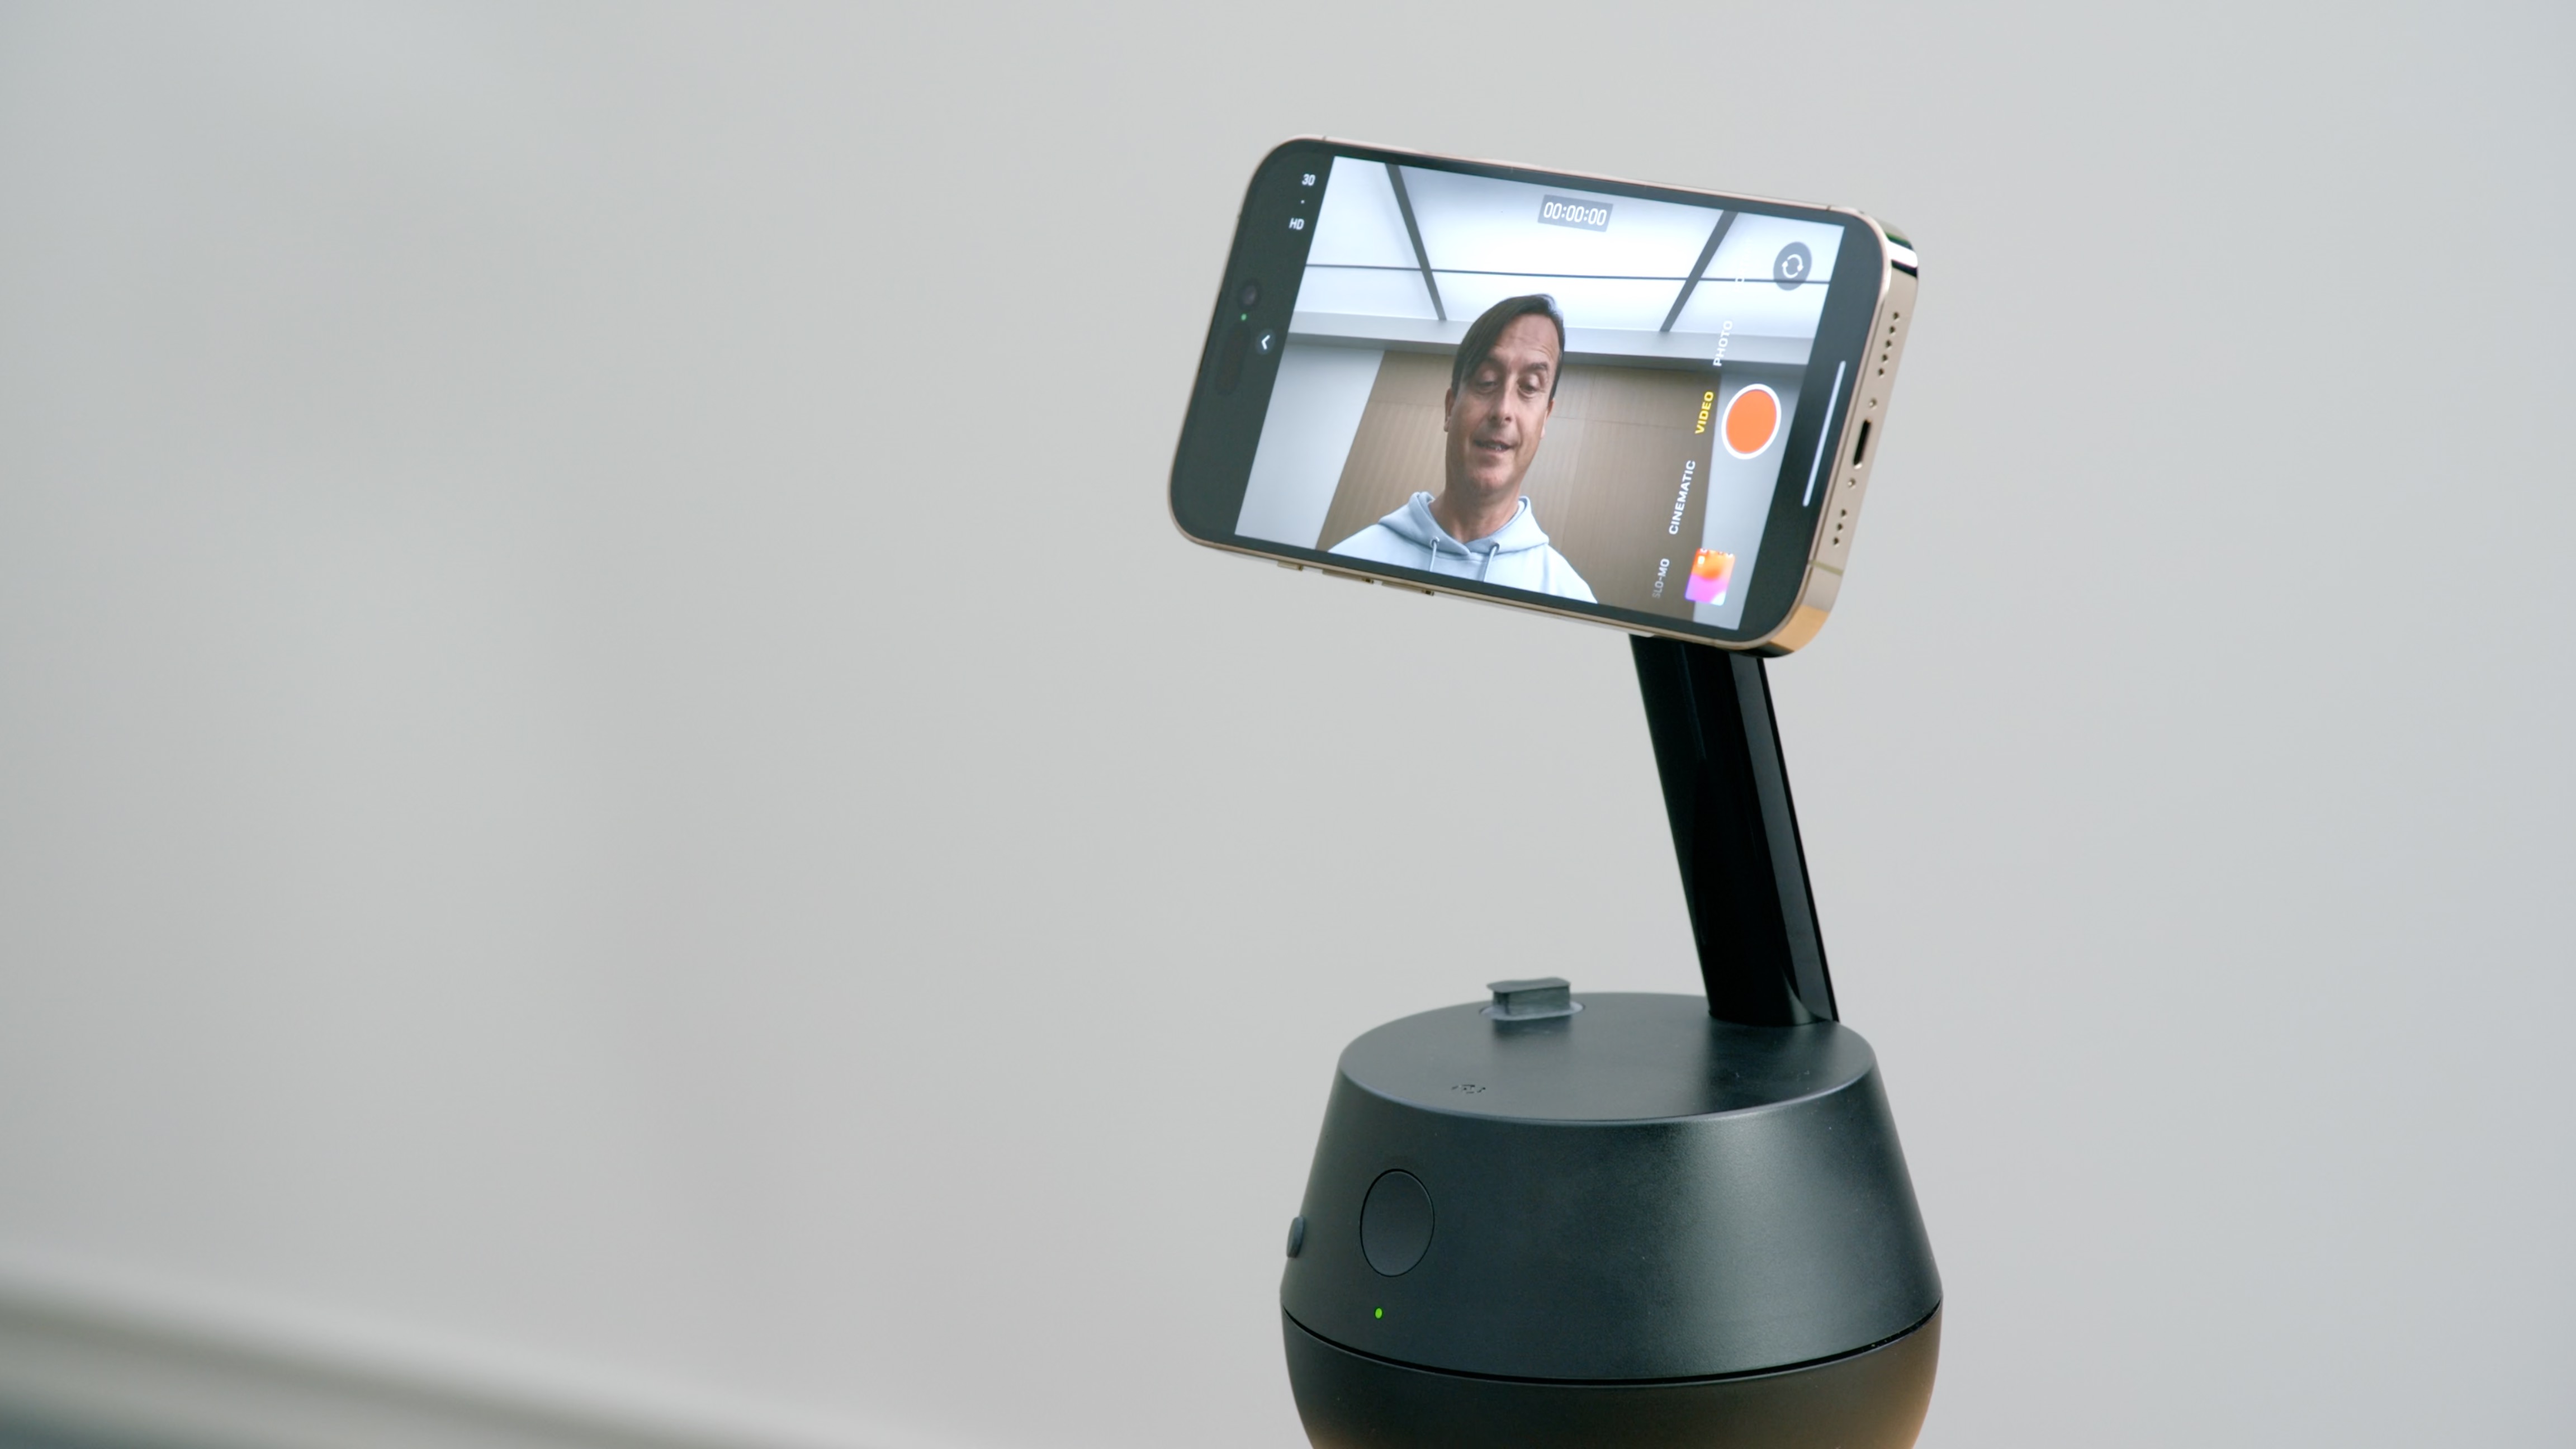 iOS 17 has new DockKit API to integrate camera apps with motorized iPhone stands